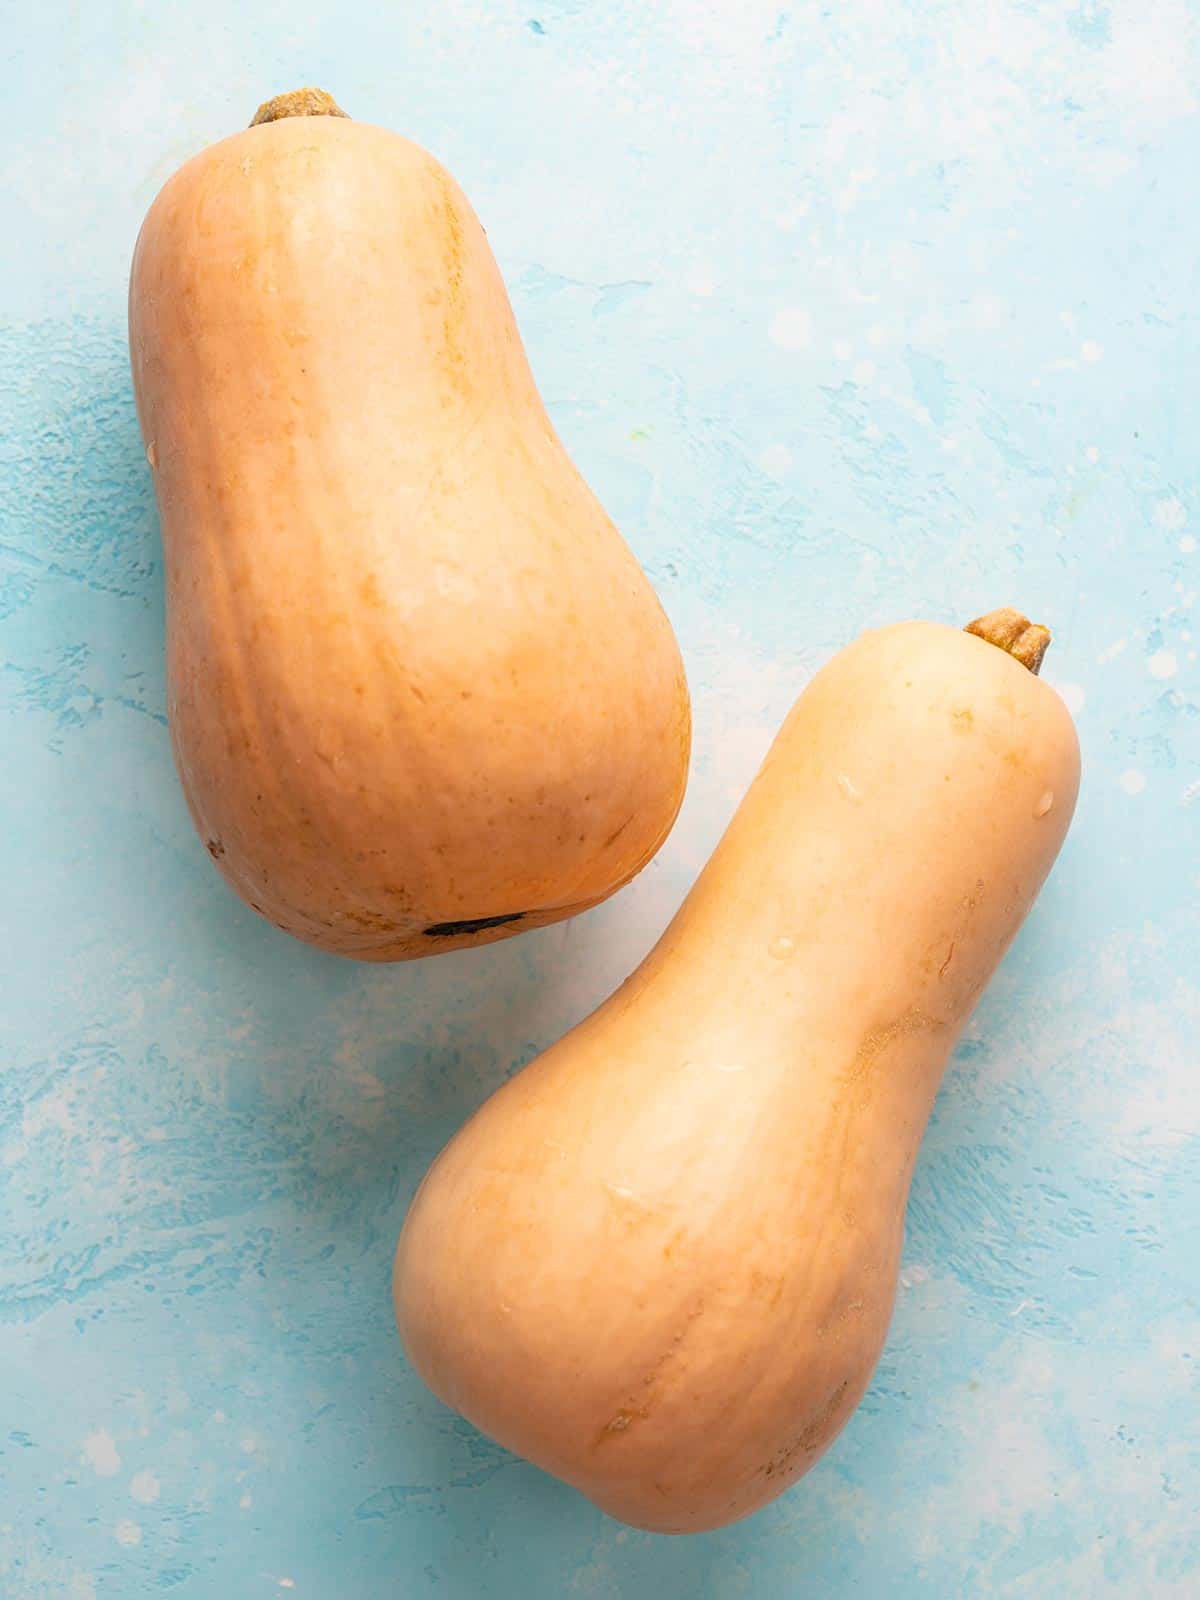 Two whole butter nut squashes on a blue background.